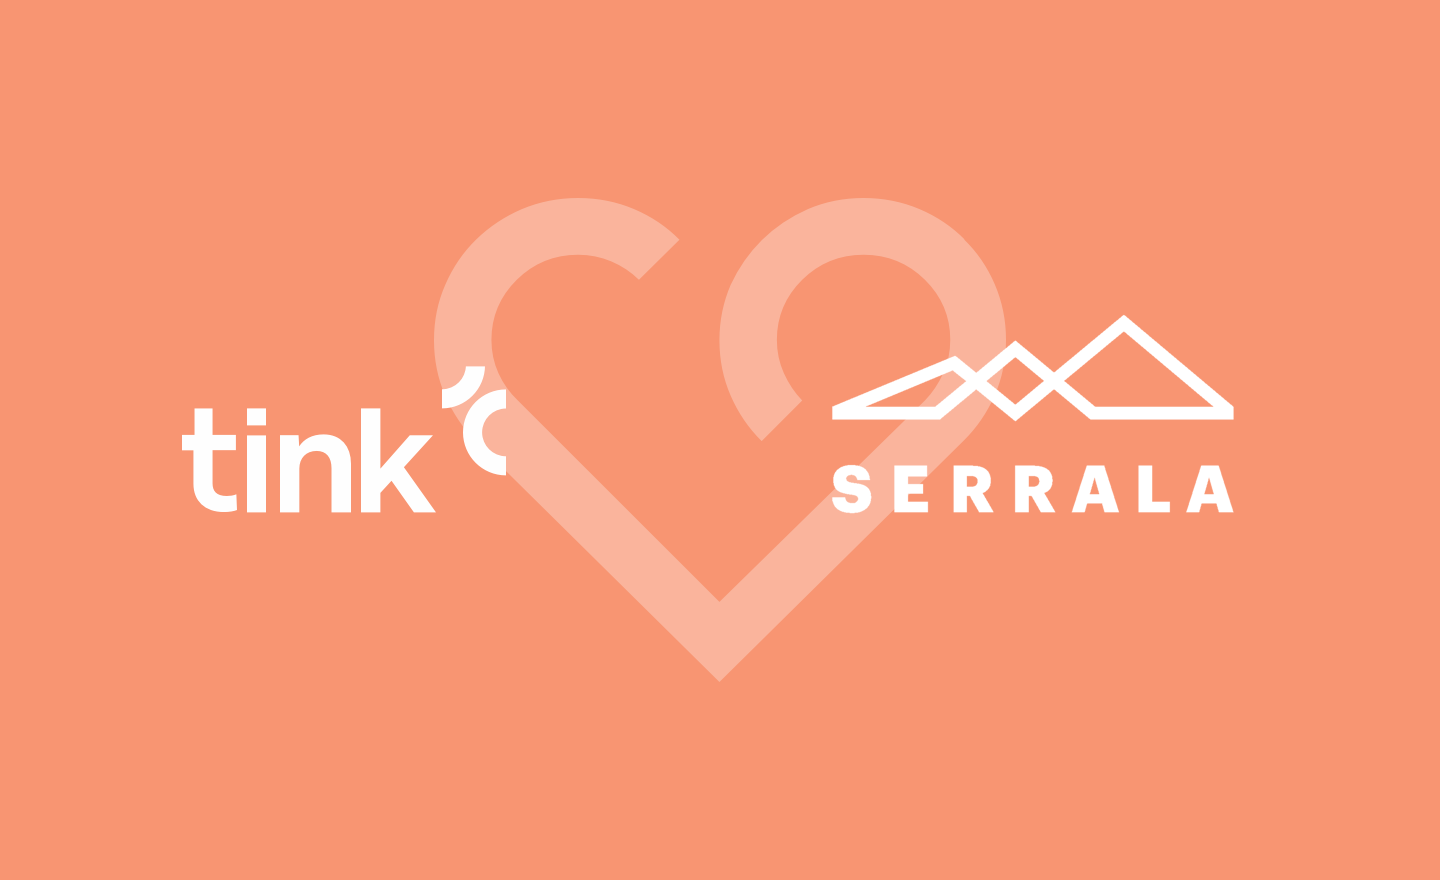 Serrala partners with Tink to offer improved bill payments across Europe